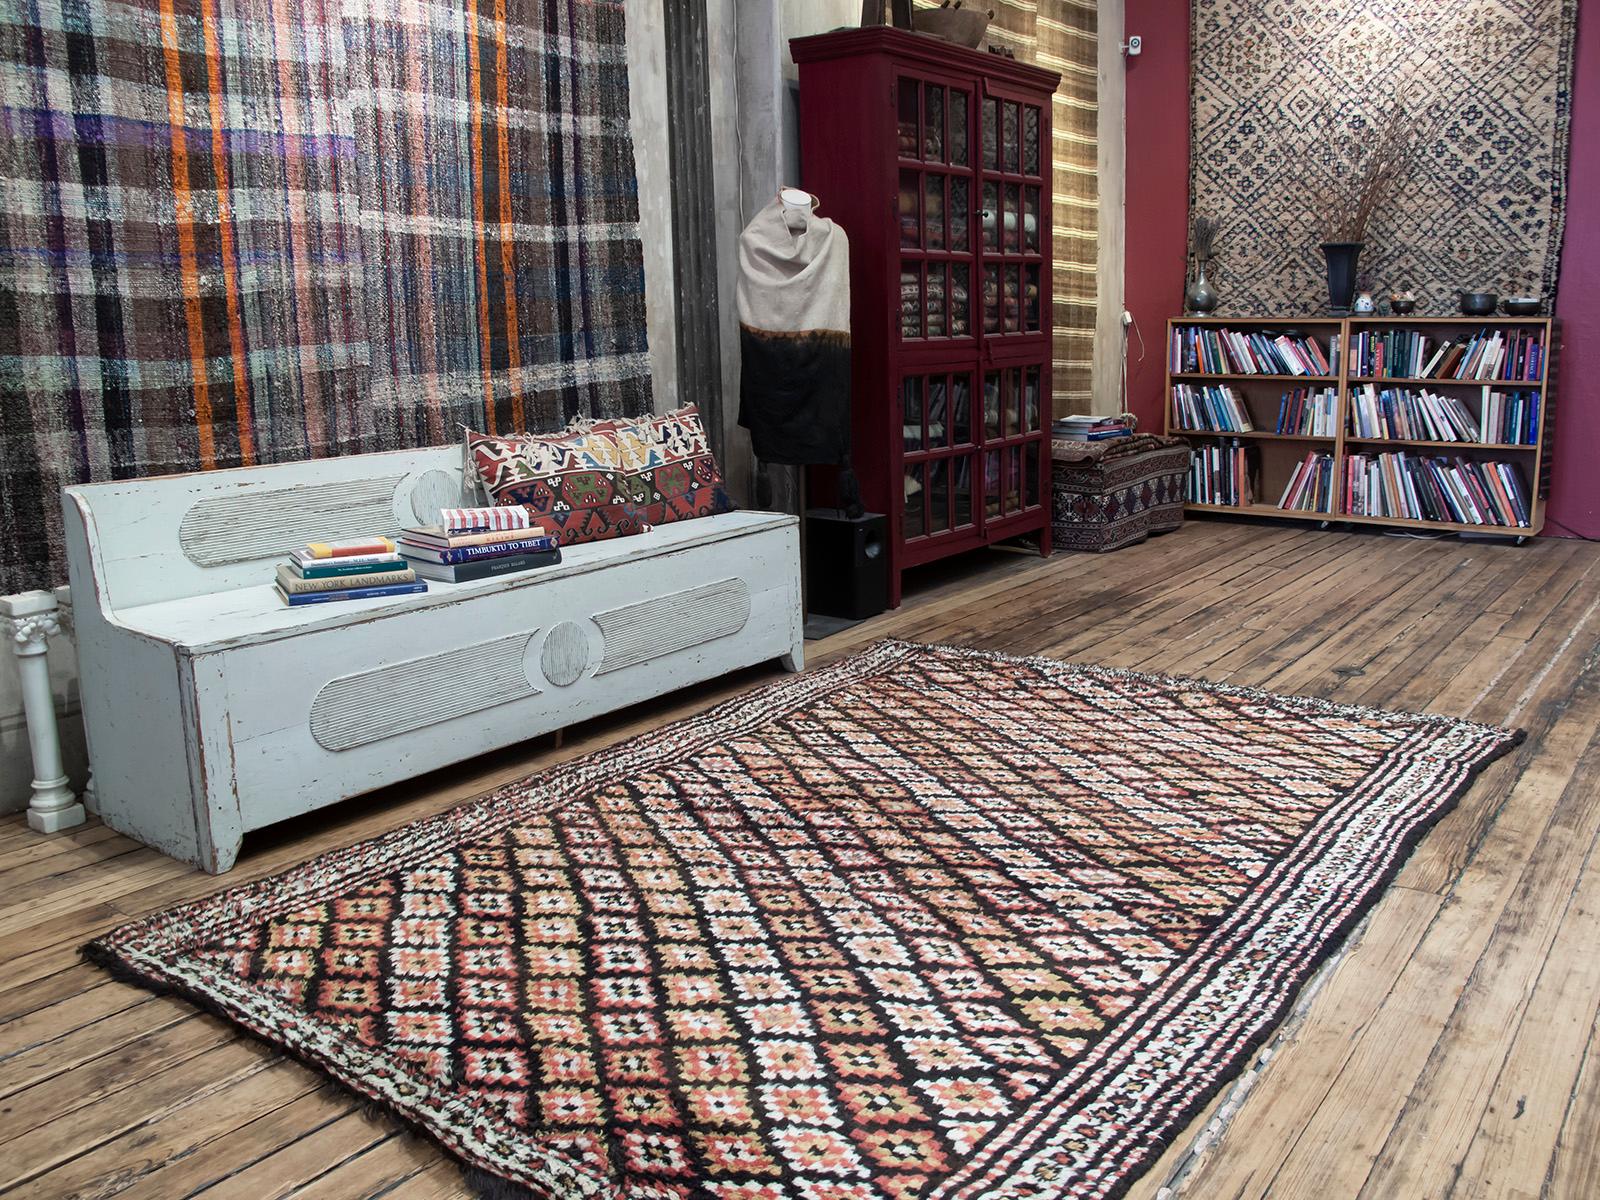 A rare antique tribal rug from Central Turkey, with thick, shaggy pile, originally meant to function as a bed in the weaver’s household - “yatak” means bed in Turkish.

Apparently quite old judging by its naturally dyed colors, it is also